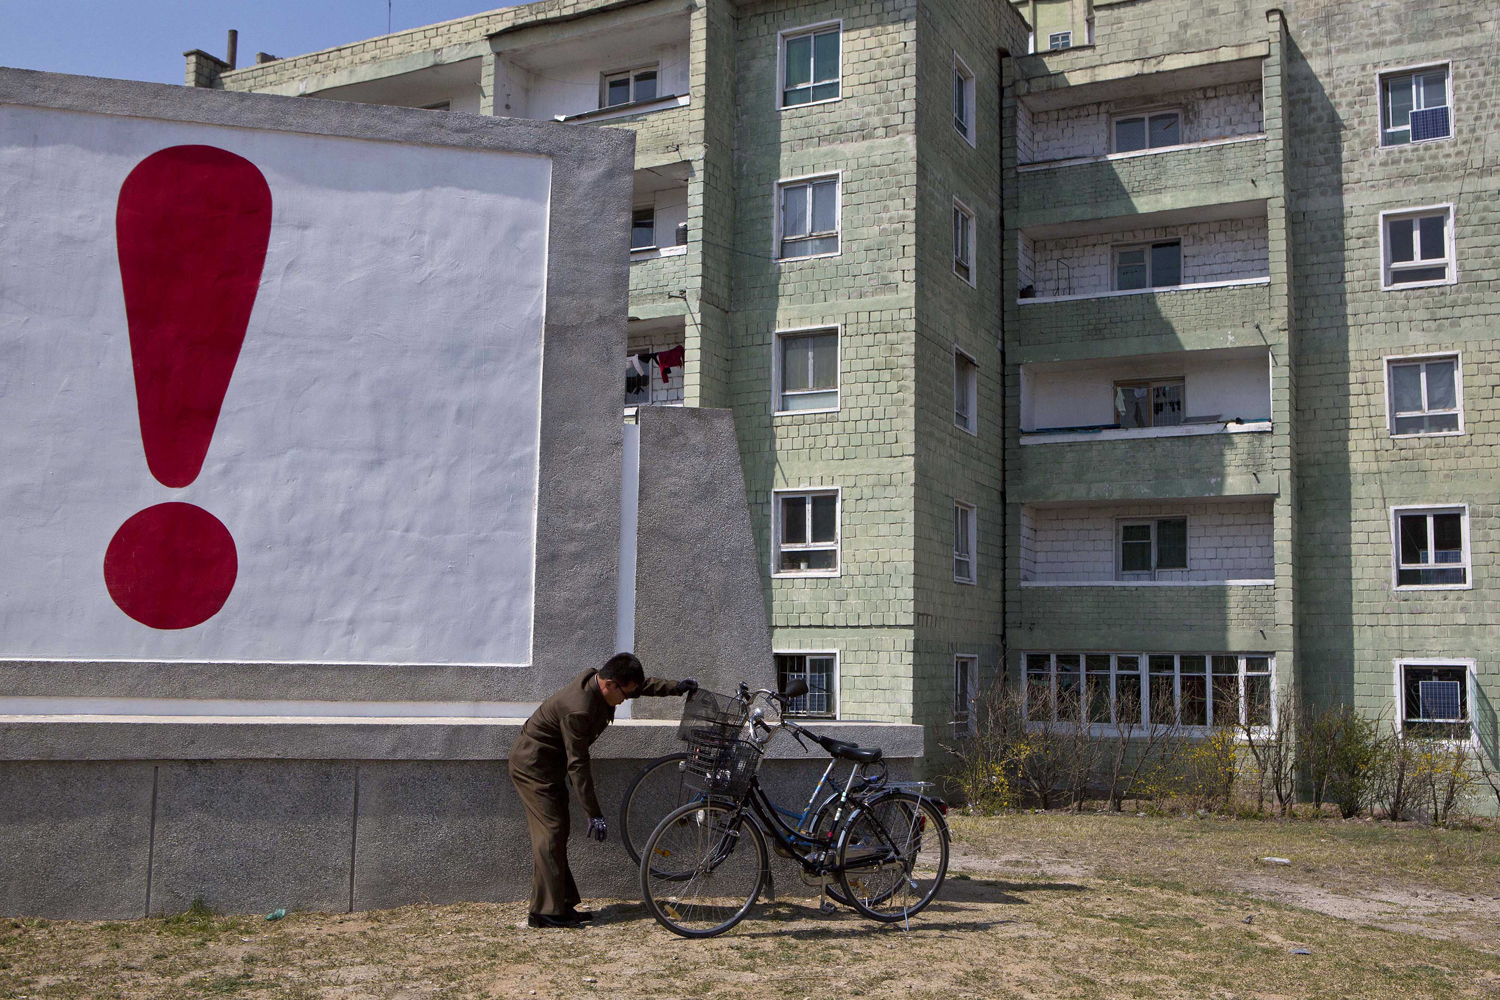 April 24, 2013. A North Korean man checks his bicycle next to a painted exclamation point on a propaganda billboard in Kaesong, North Korea.